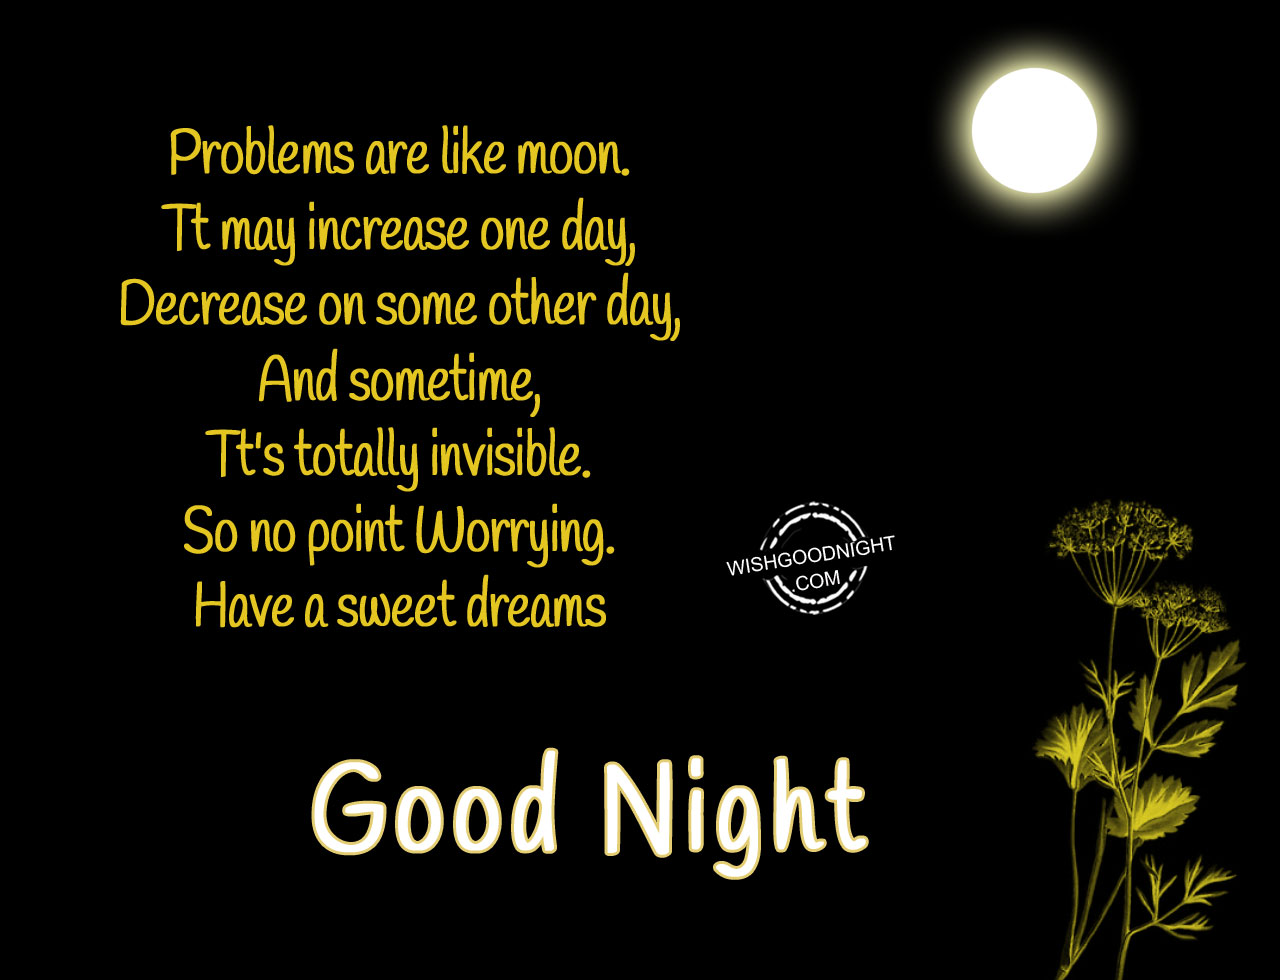 Problems are like moon - Good Night Pictures – WishGoodNight.com